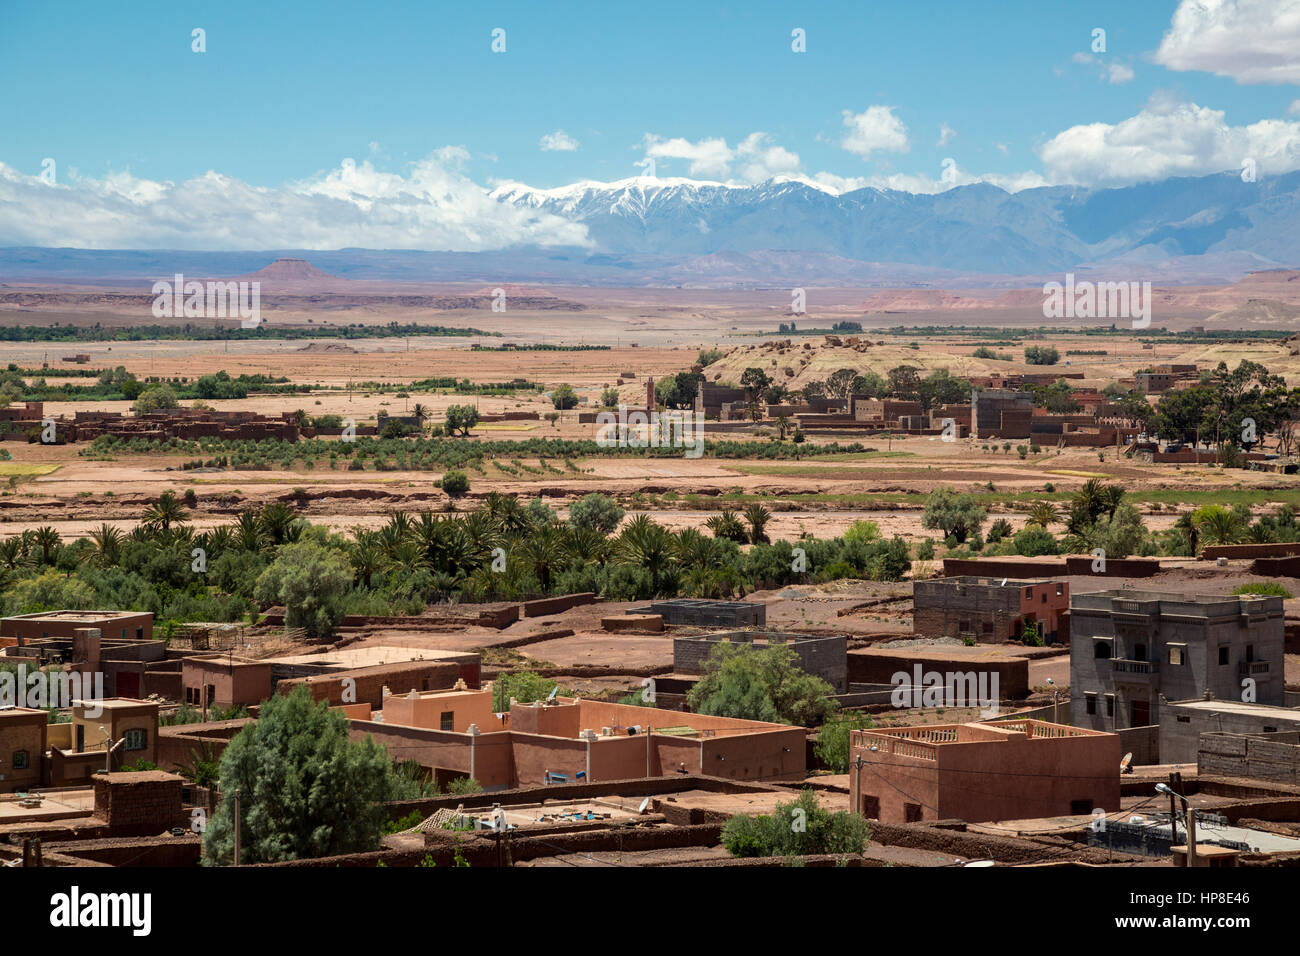 Atlas Mountains, Morocco.  Snow on Mountains in May, Village in Foreground. Stock Photo